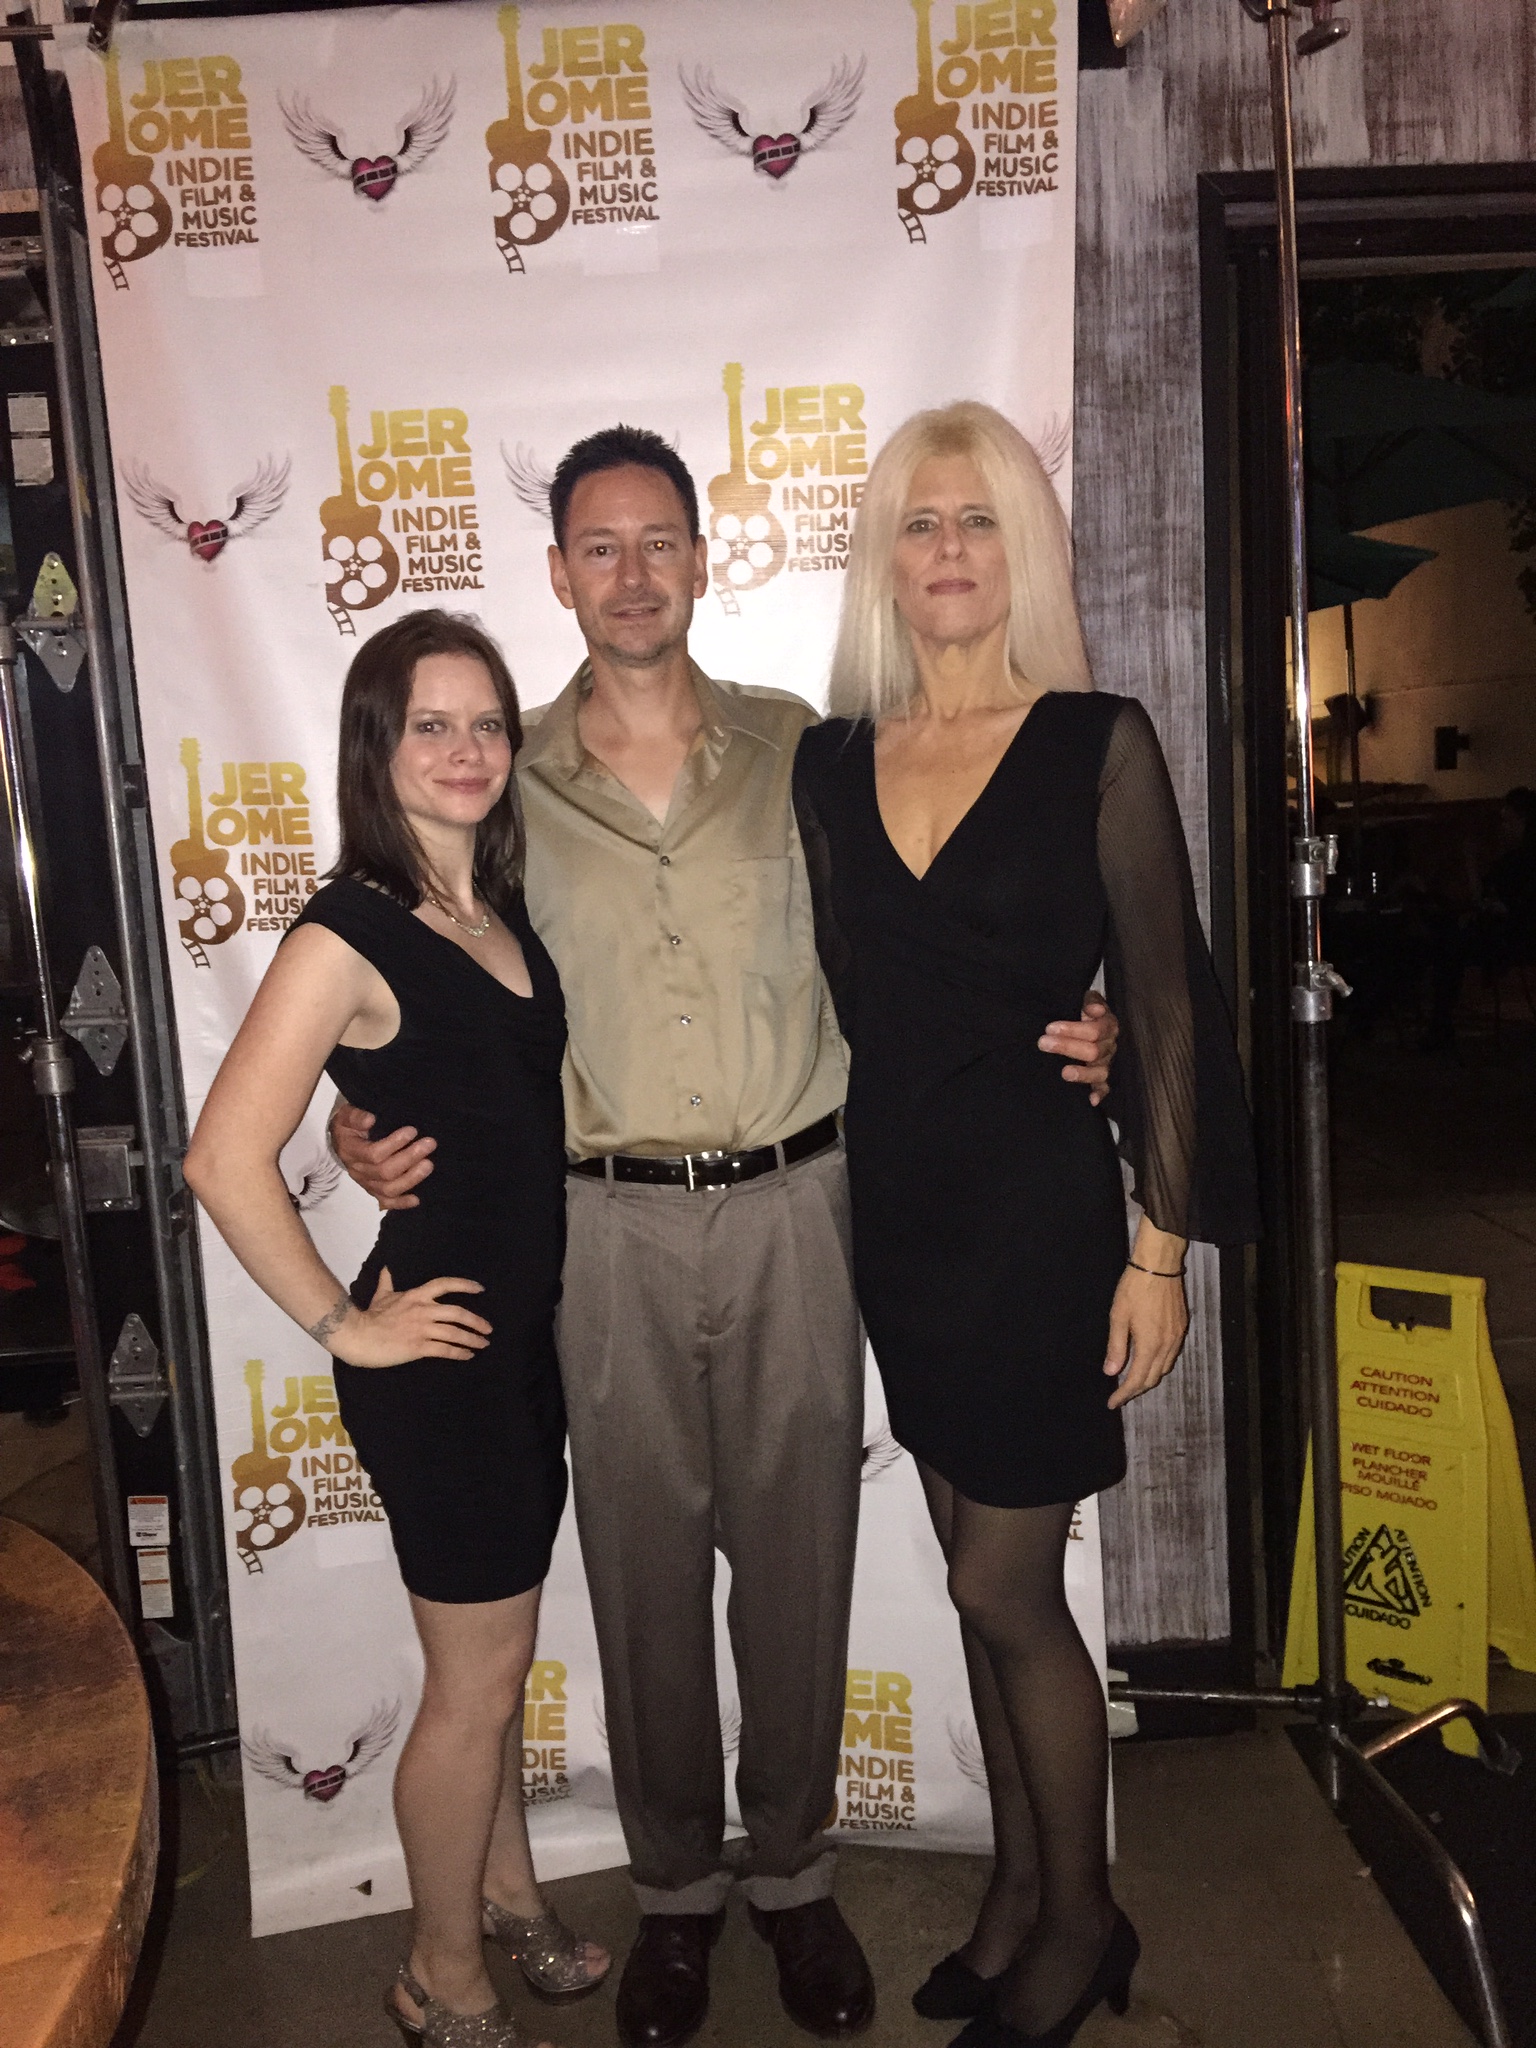 Nicolle Ashley, Bruce Coleman & Virginia - Jerome Indie Film & Music Festival Kick-off Party July 31,2015